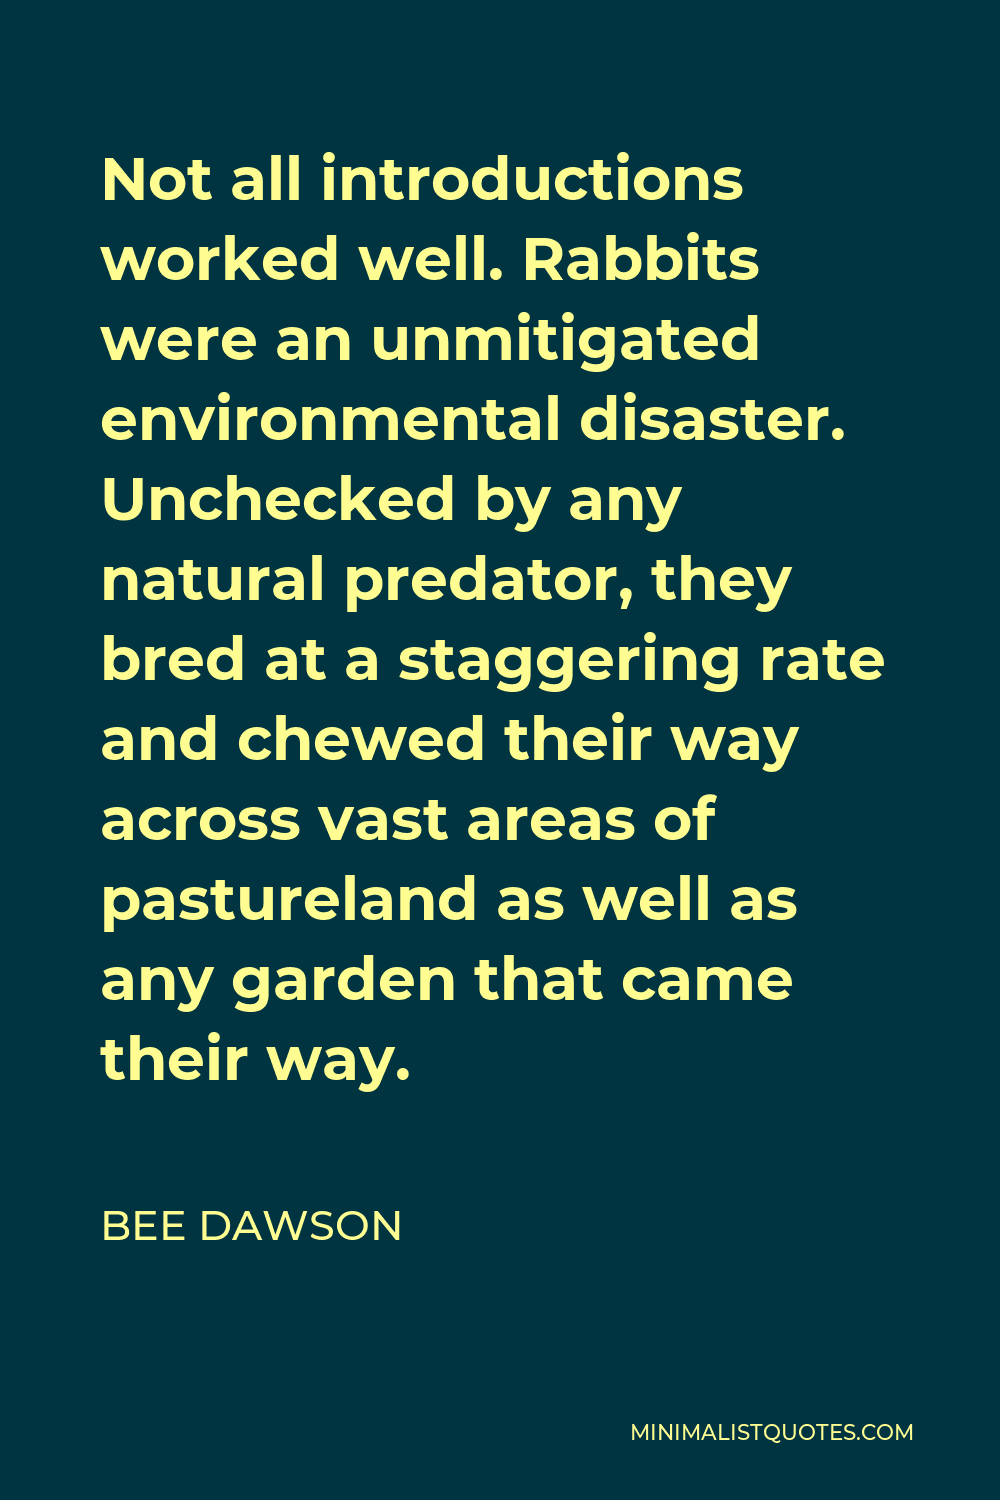 Bee Dawson Quote - Not all introductions worked well. Rabbits were an unmitigated environmental disaster. Unchecked by any natural predator, they bred at a staggering rate and chewed their way across vast areas of pastureland as well as any garden that came their way.